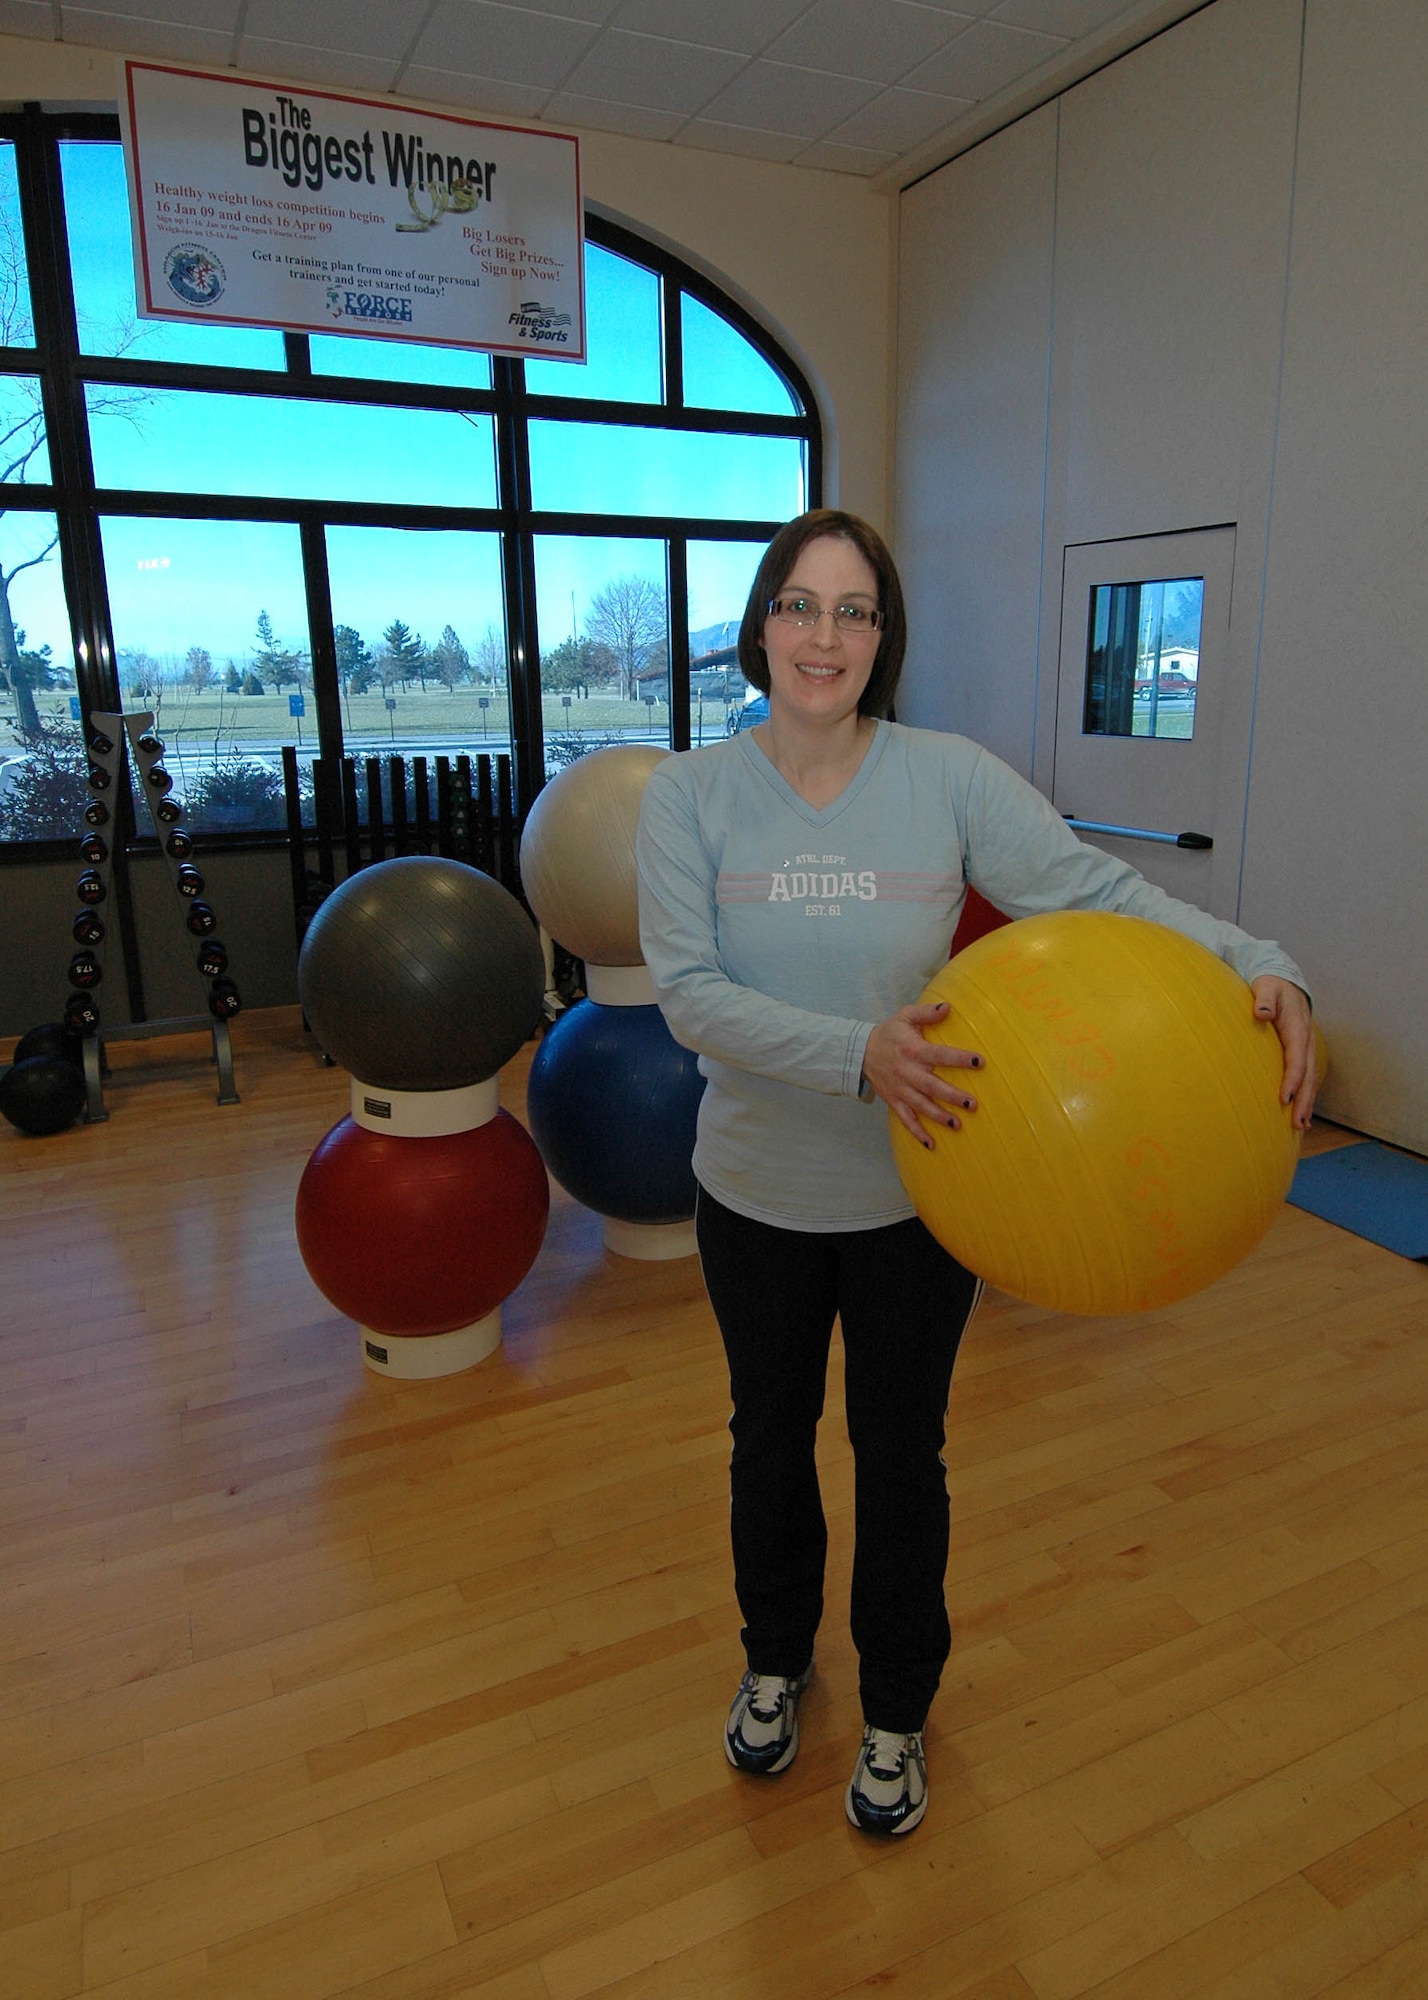 Effie Rosenblum pictured here Feb. 14 says exercising with the ball at the Aviano Air Base Dragon Fitness Center is a key element of her workout routine since she first signed up for the Aviano Biggest Winner Contest in Jan. 2008.  Rosenblum has lost 10 pant sizes since first signing up 13 months ago and is enrolled in the 2009 contest as well. (U.S. Air Force photo by/Tech. Sgt. Michael O'Connor) 